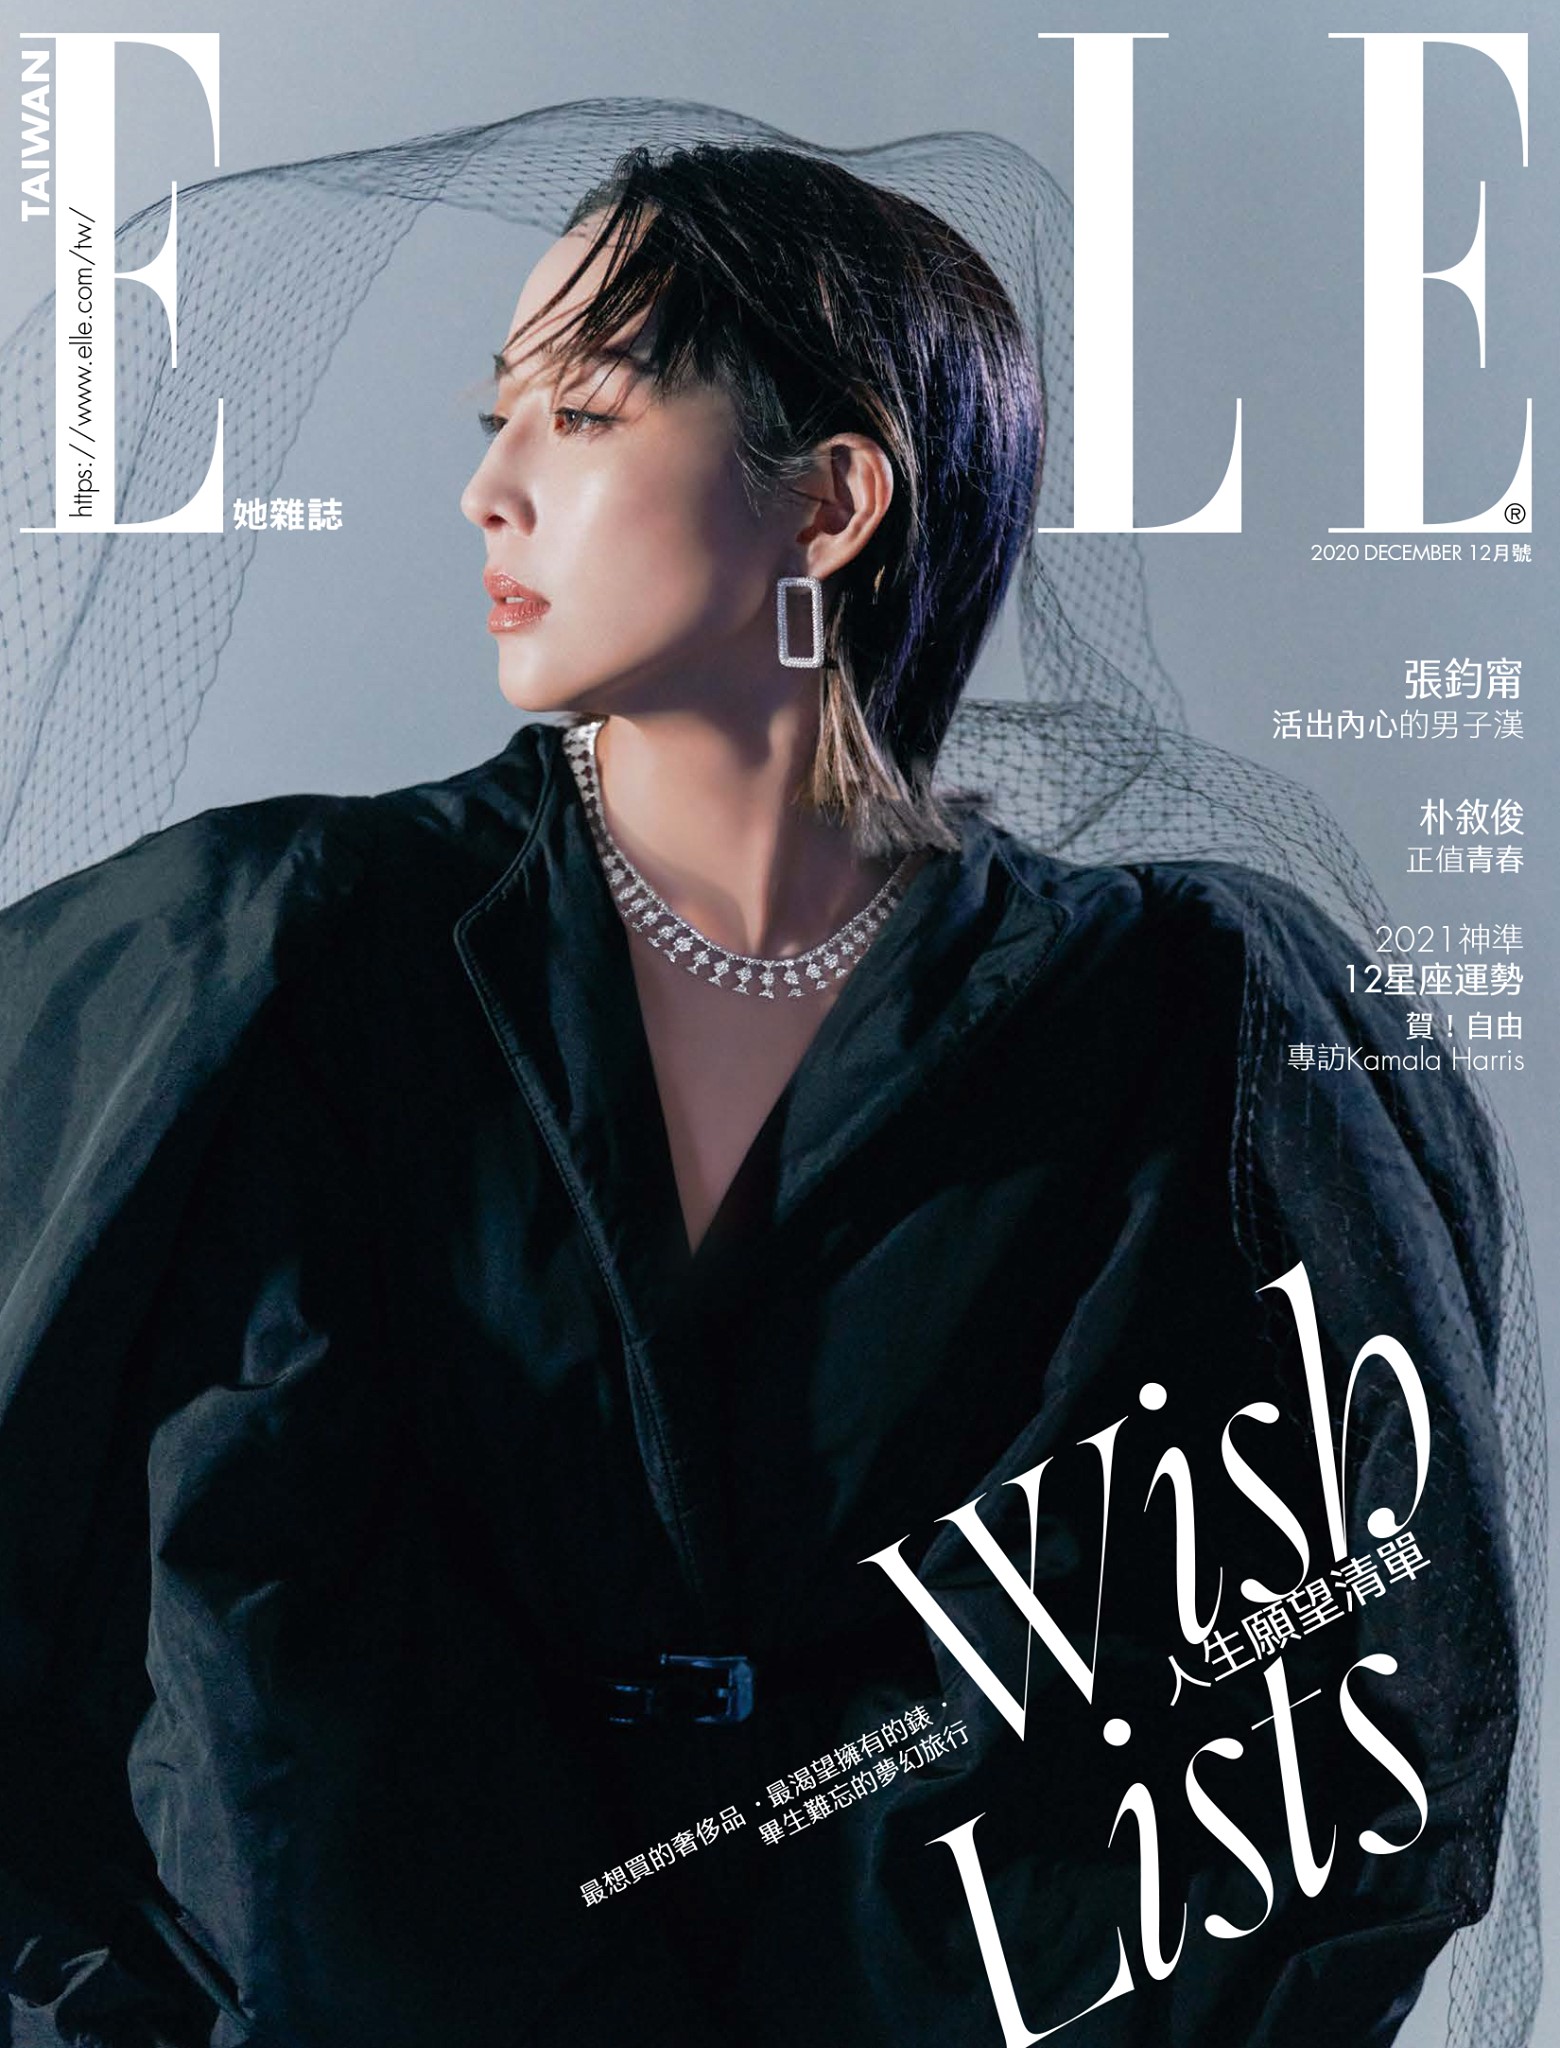 Top Taiwanese Actress 張鈞甯Ning Chang in APM Monaco on ELLE Taiwan December Cover. ❤️😍 